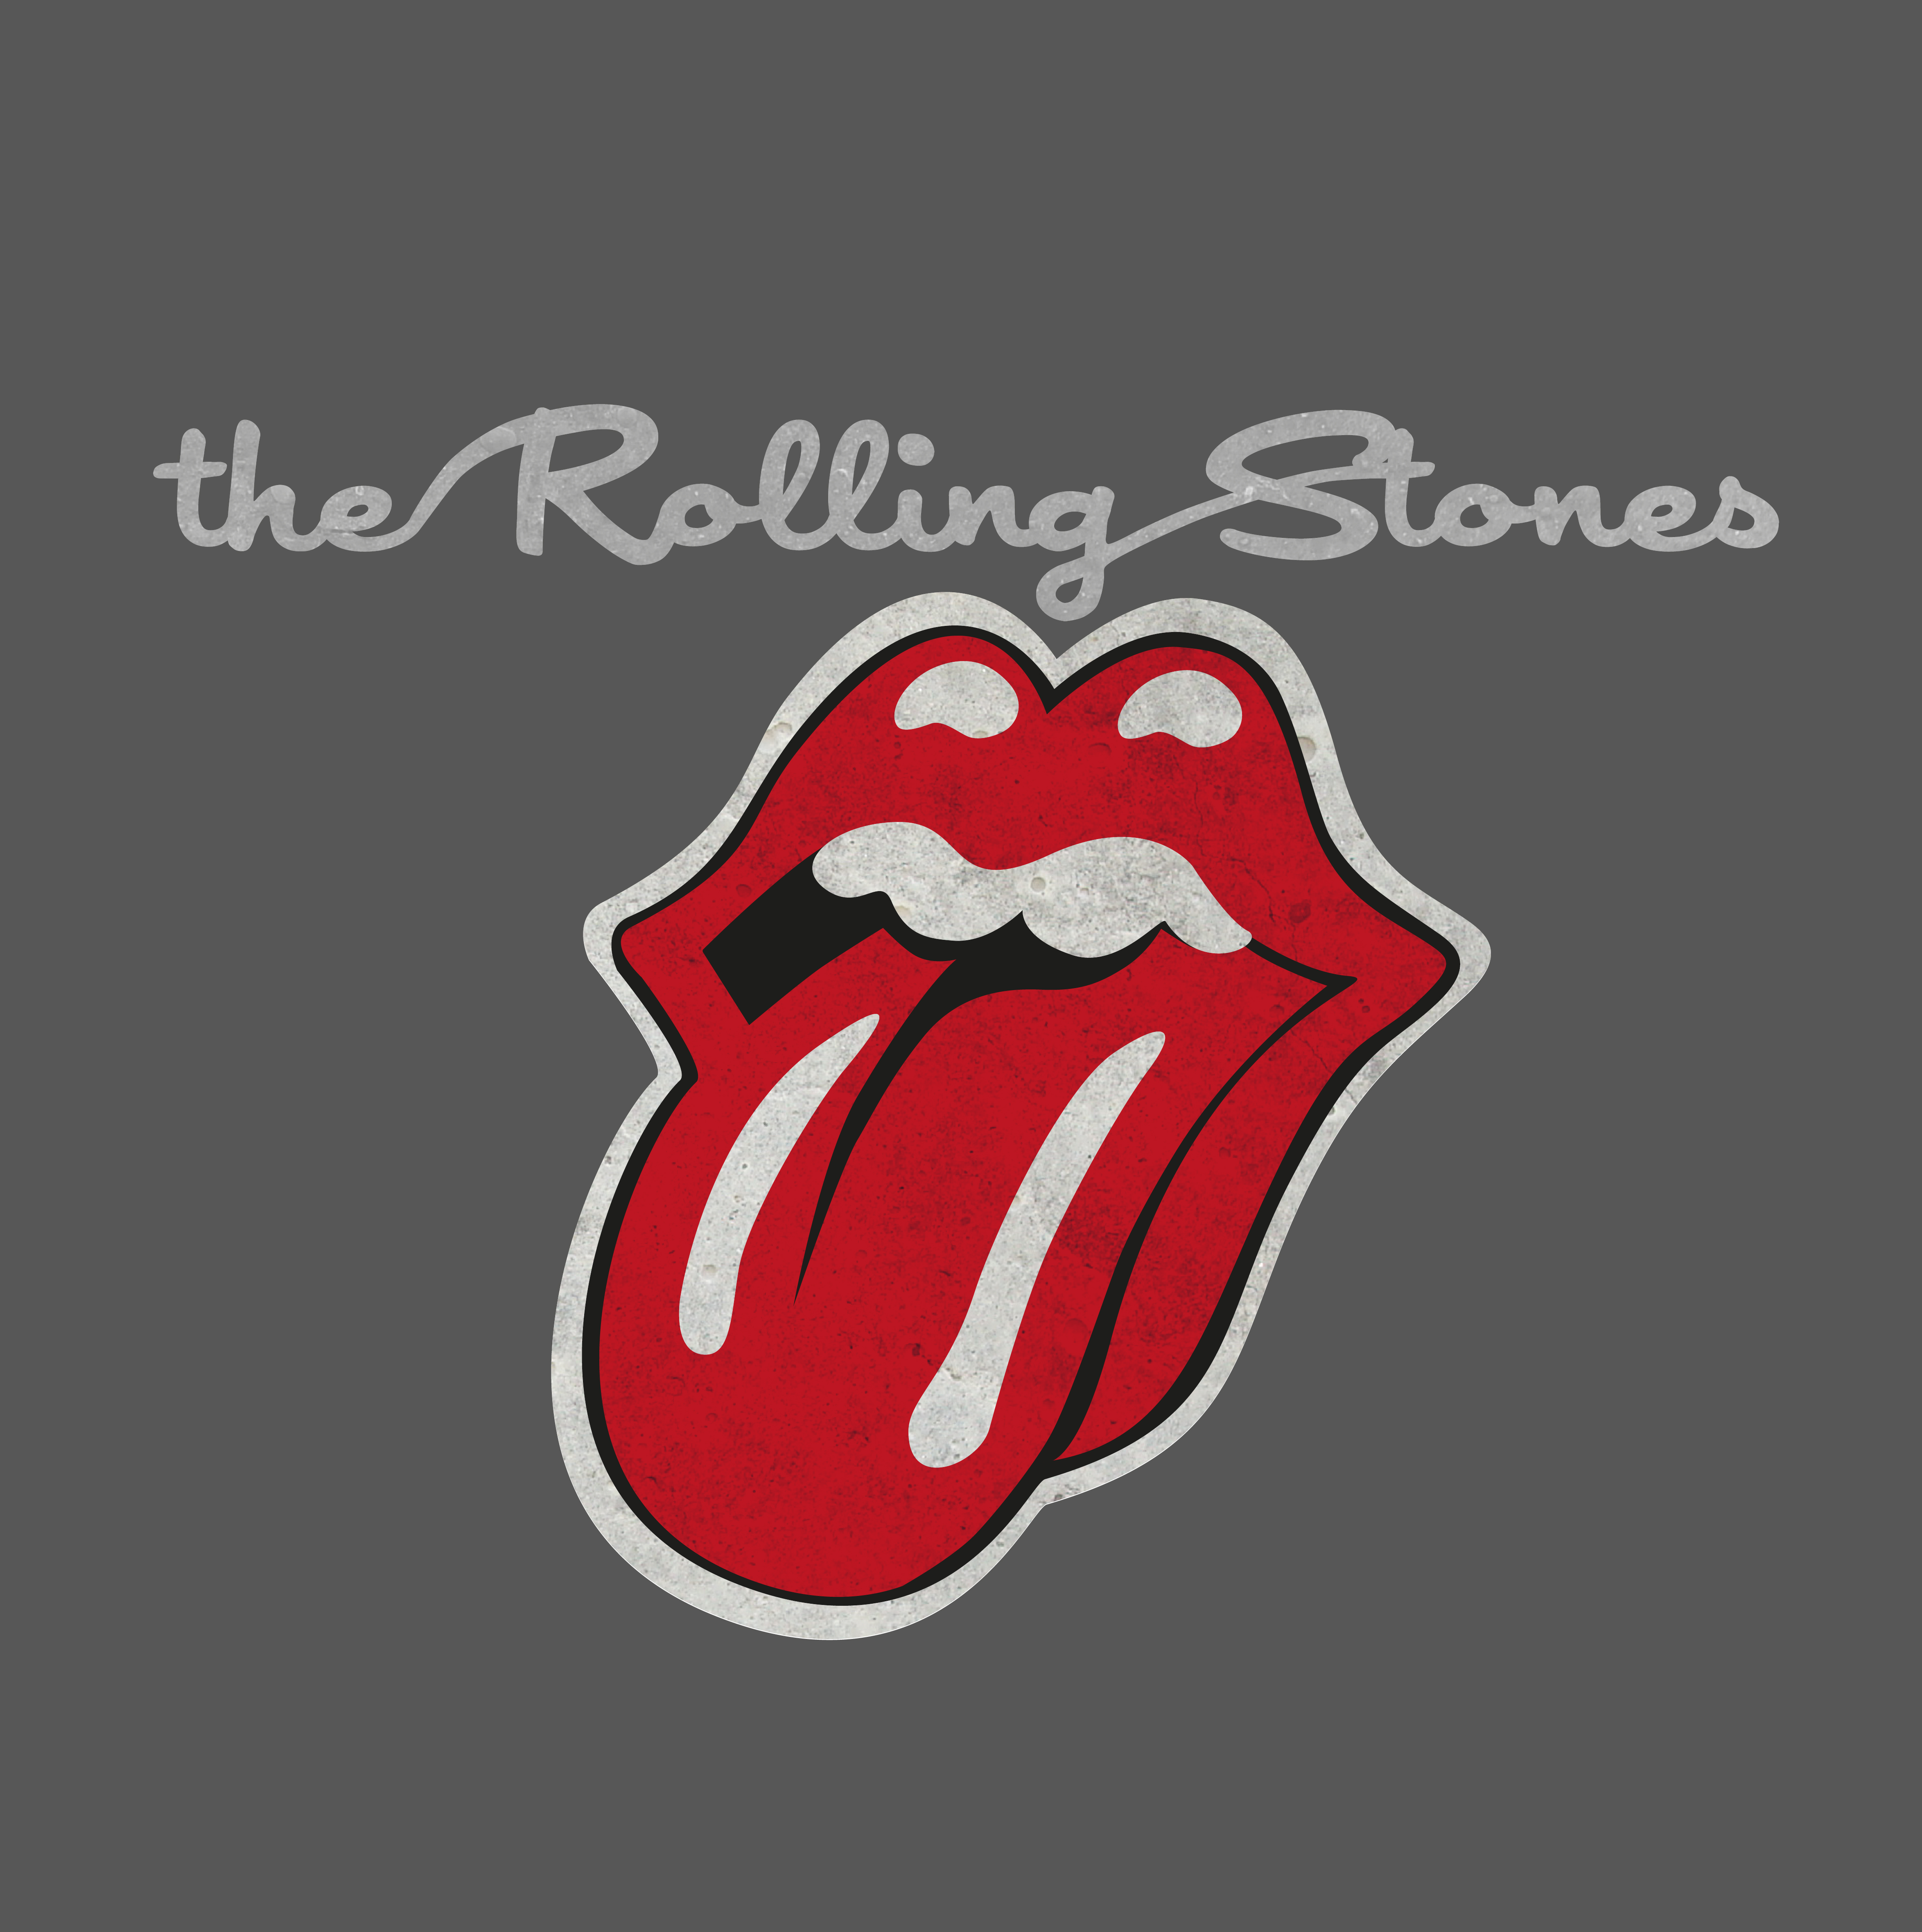 THE ROLLING STONES WALLPAPERS FREE Wallpapers Background images